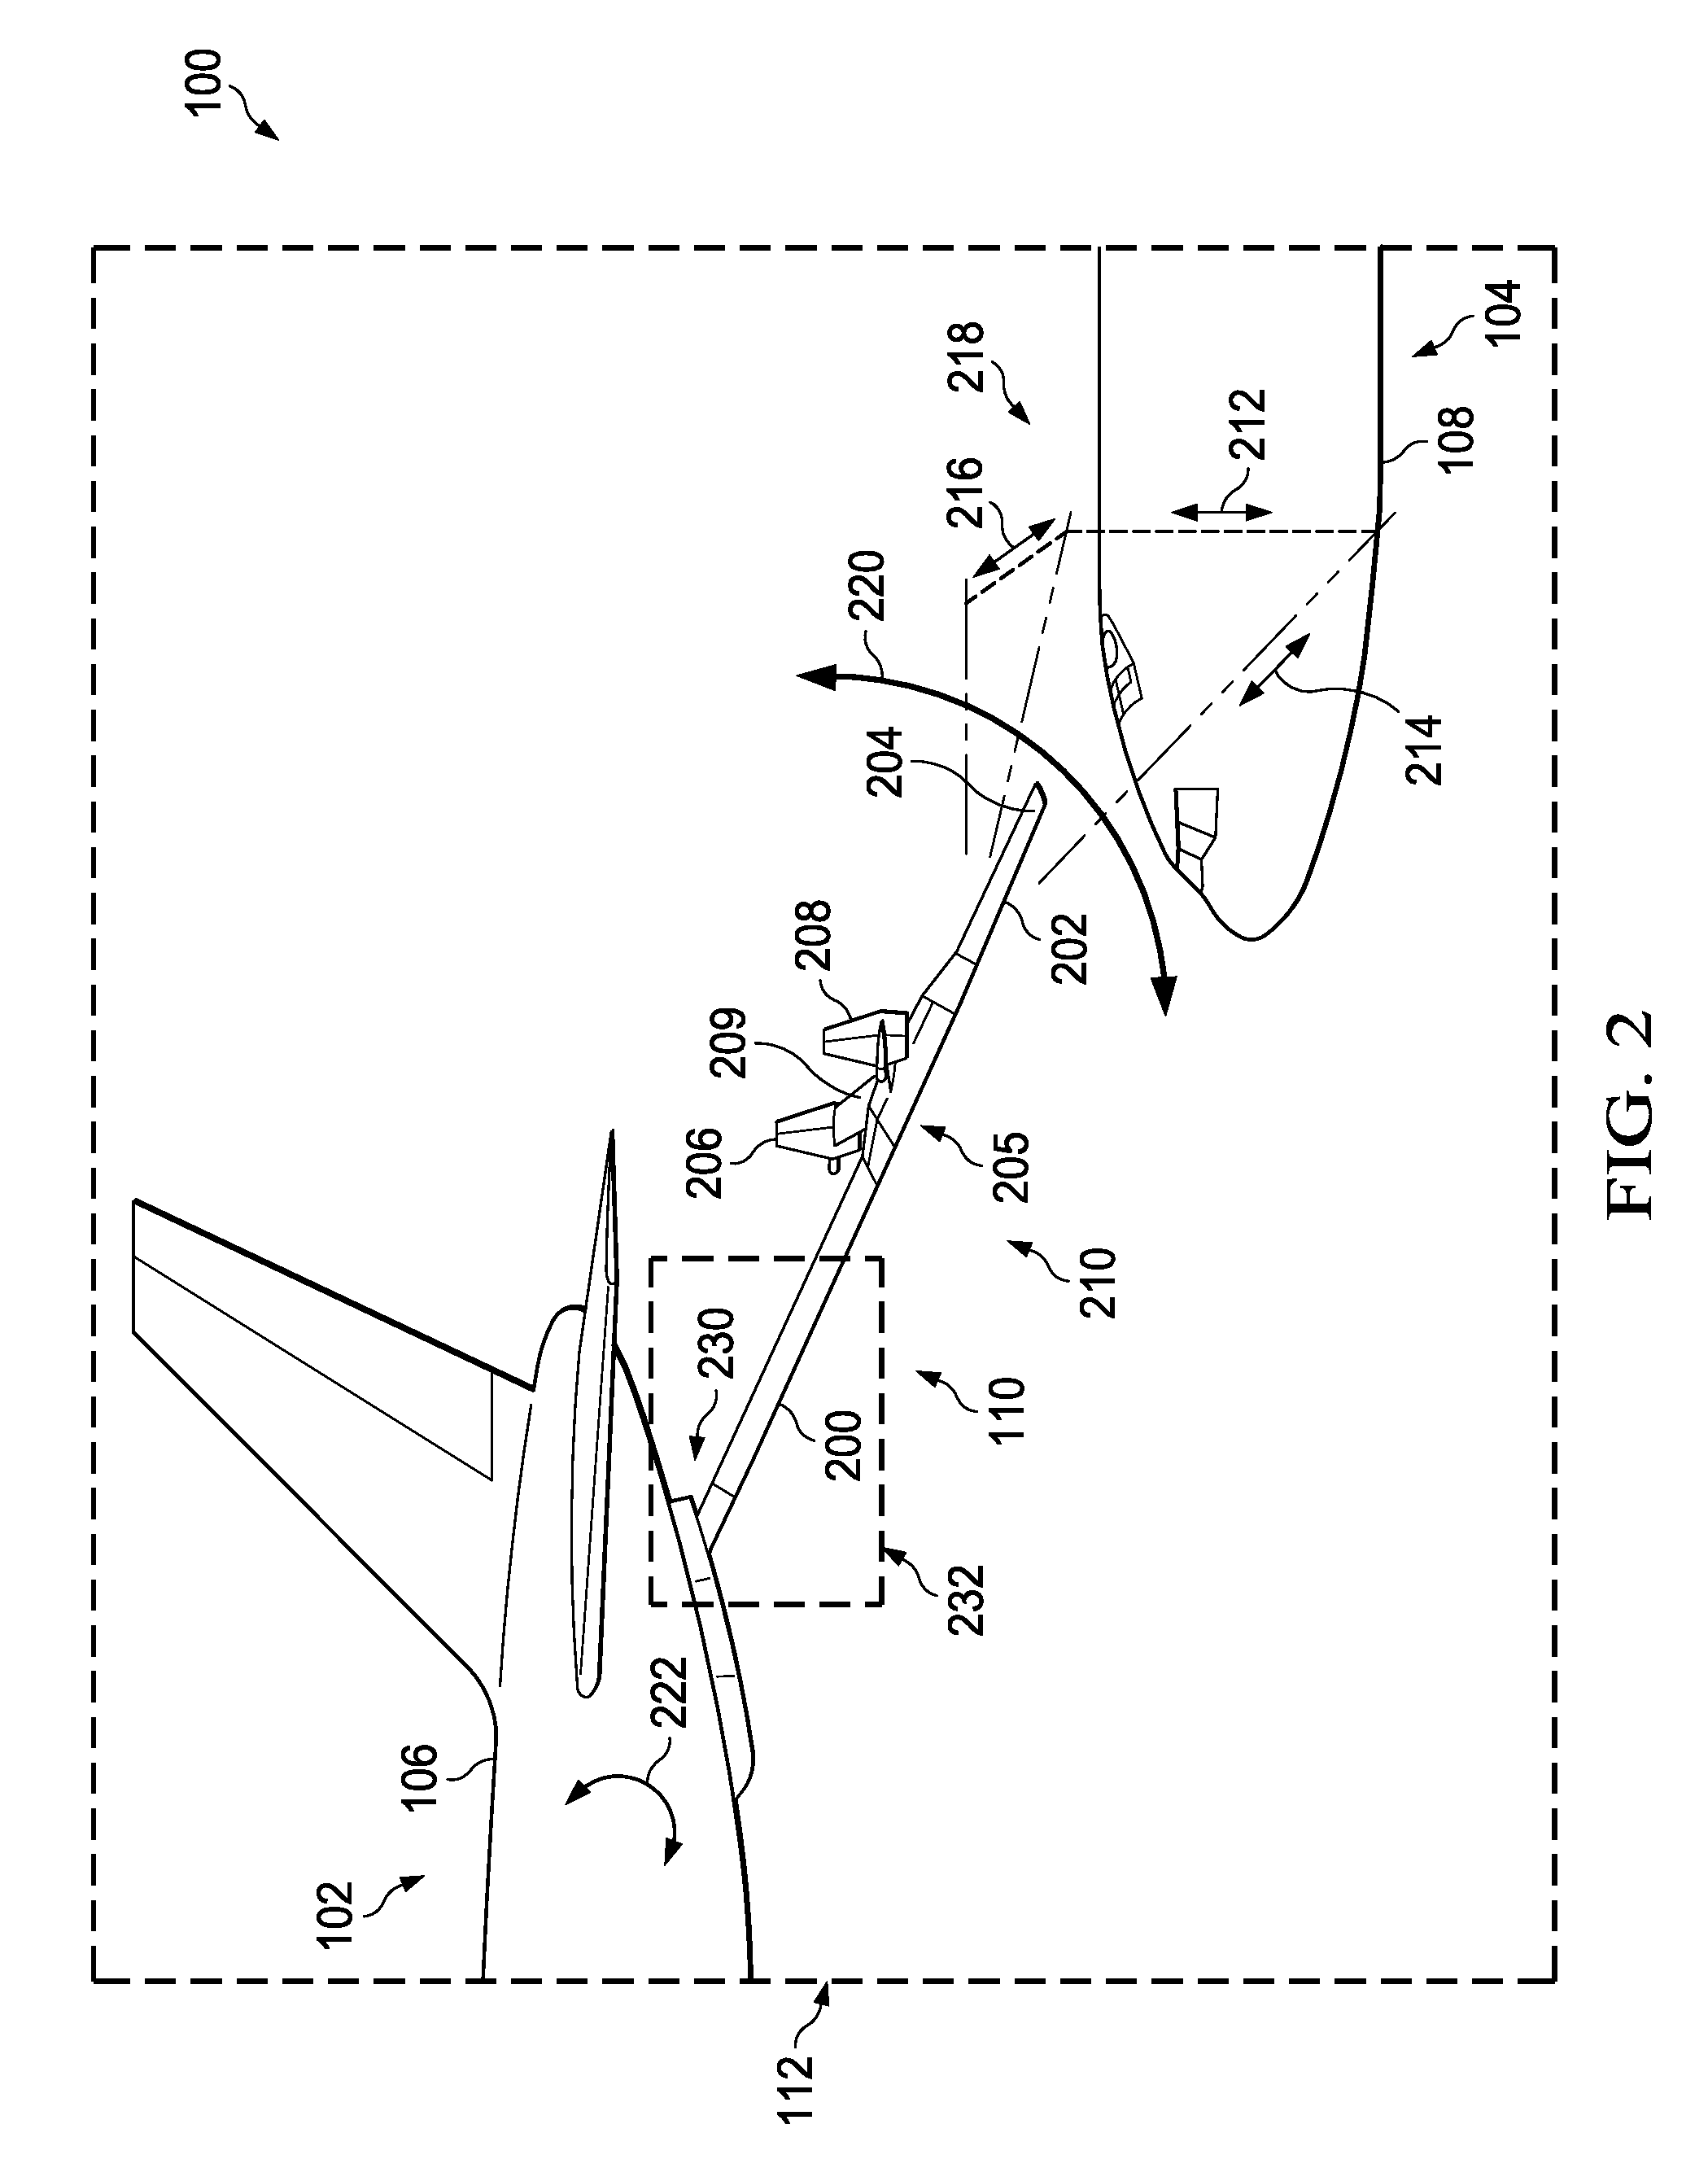 Refueling boom control system